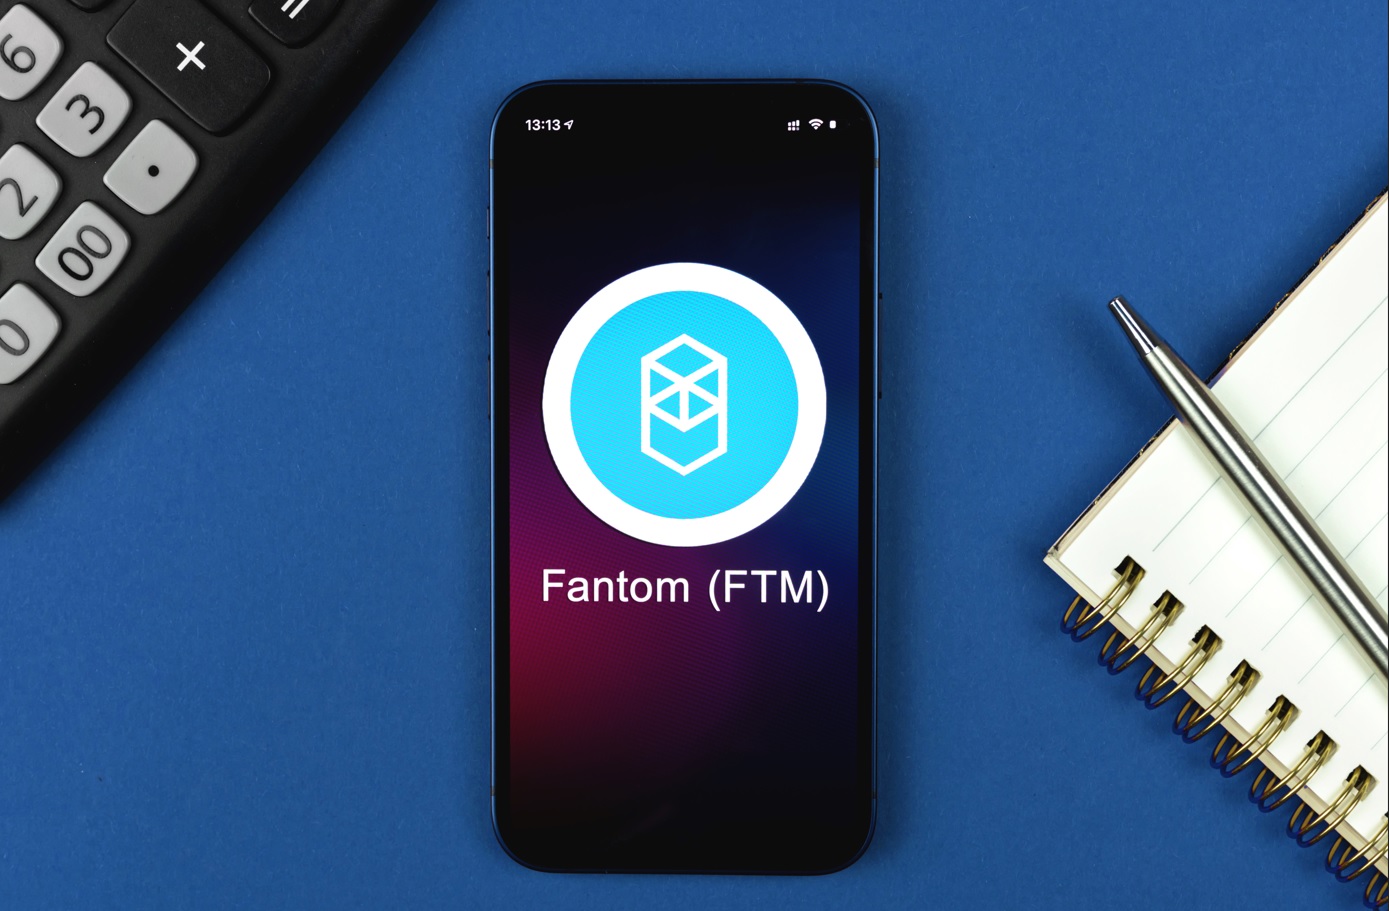 Fantom (FTM) rally is slowing but the coin remains well on course towards $3 in the near term